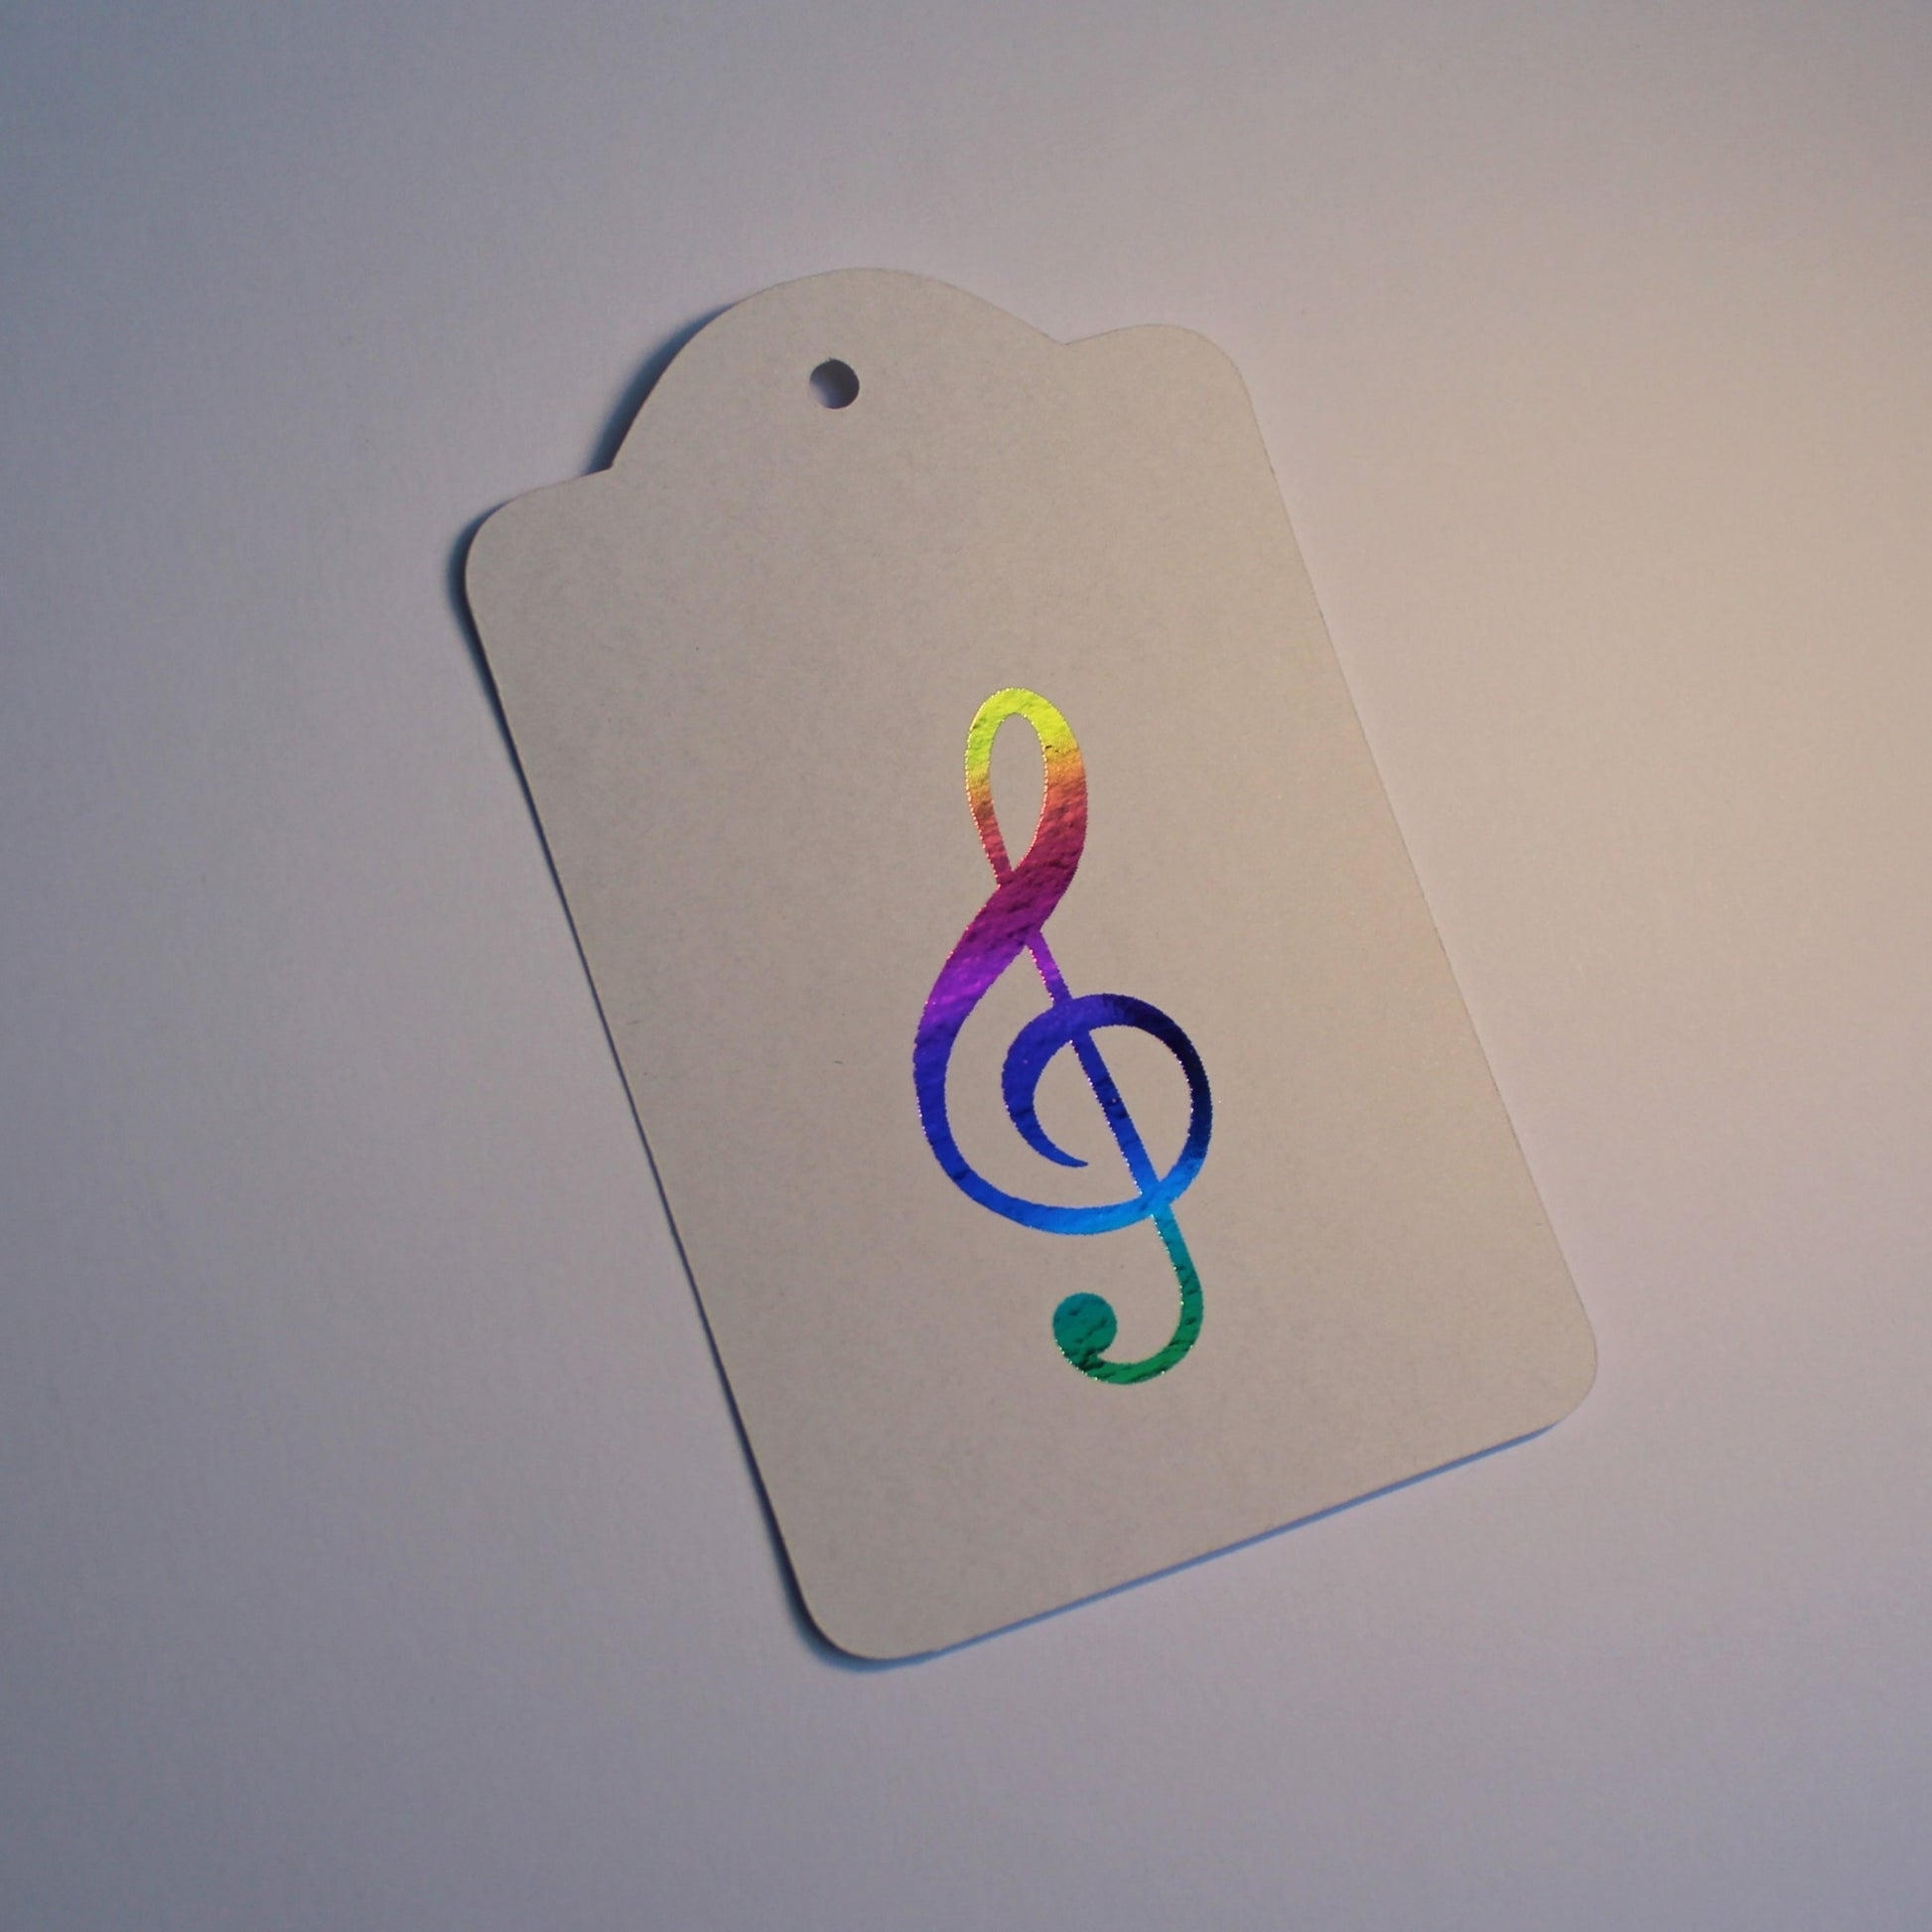 Oblong white tag with a treble clef in the centre, displayed in multicoloured shiny foil.